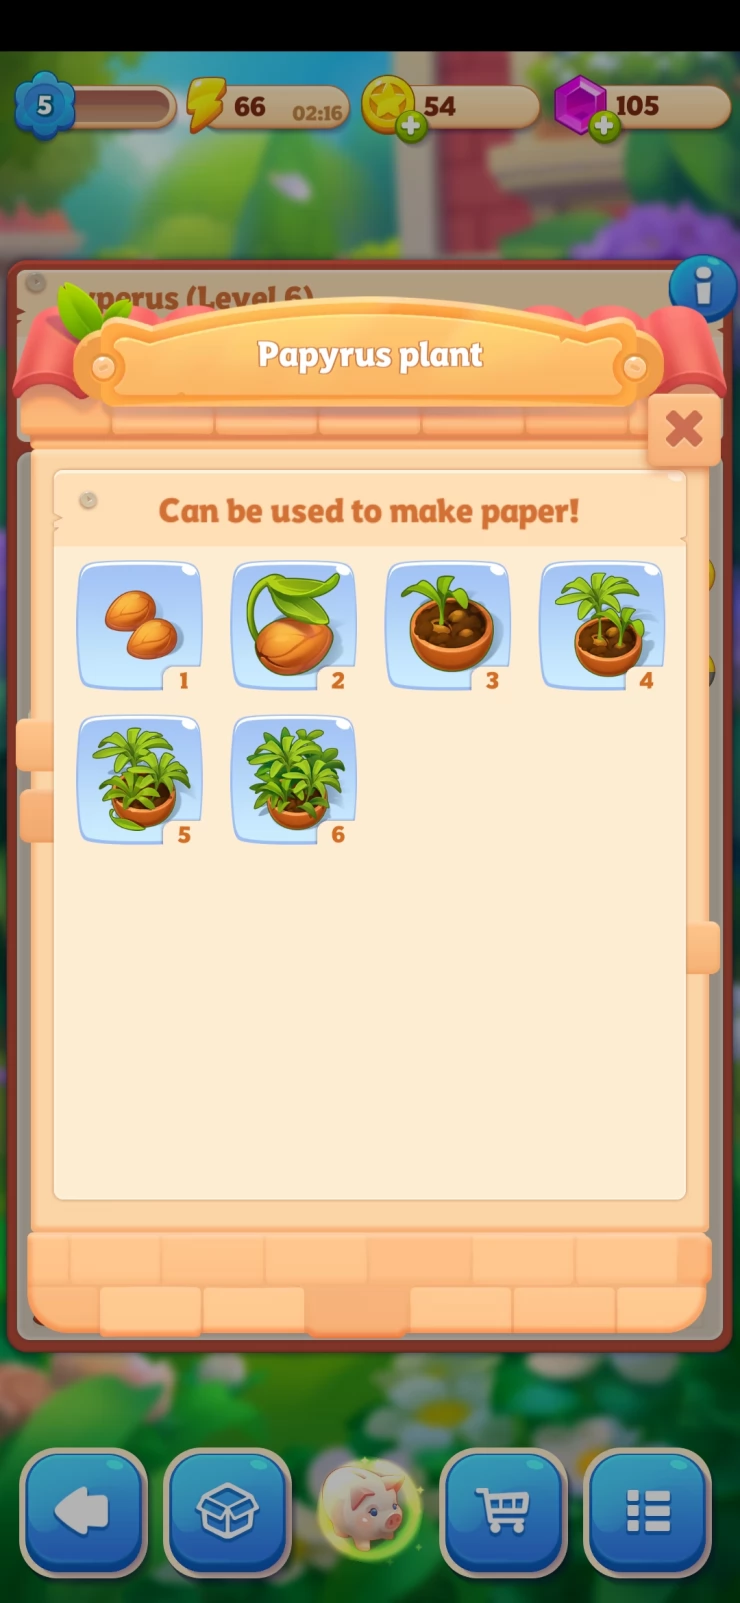 Level 6 Papyrus Plant will give Papyrus for Wallpaper